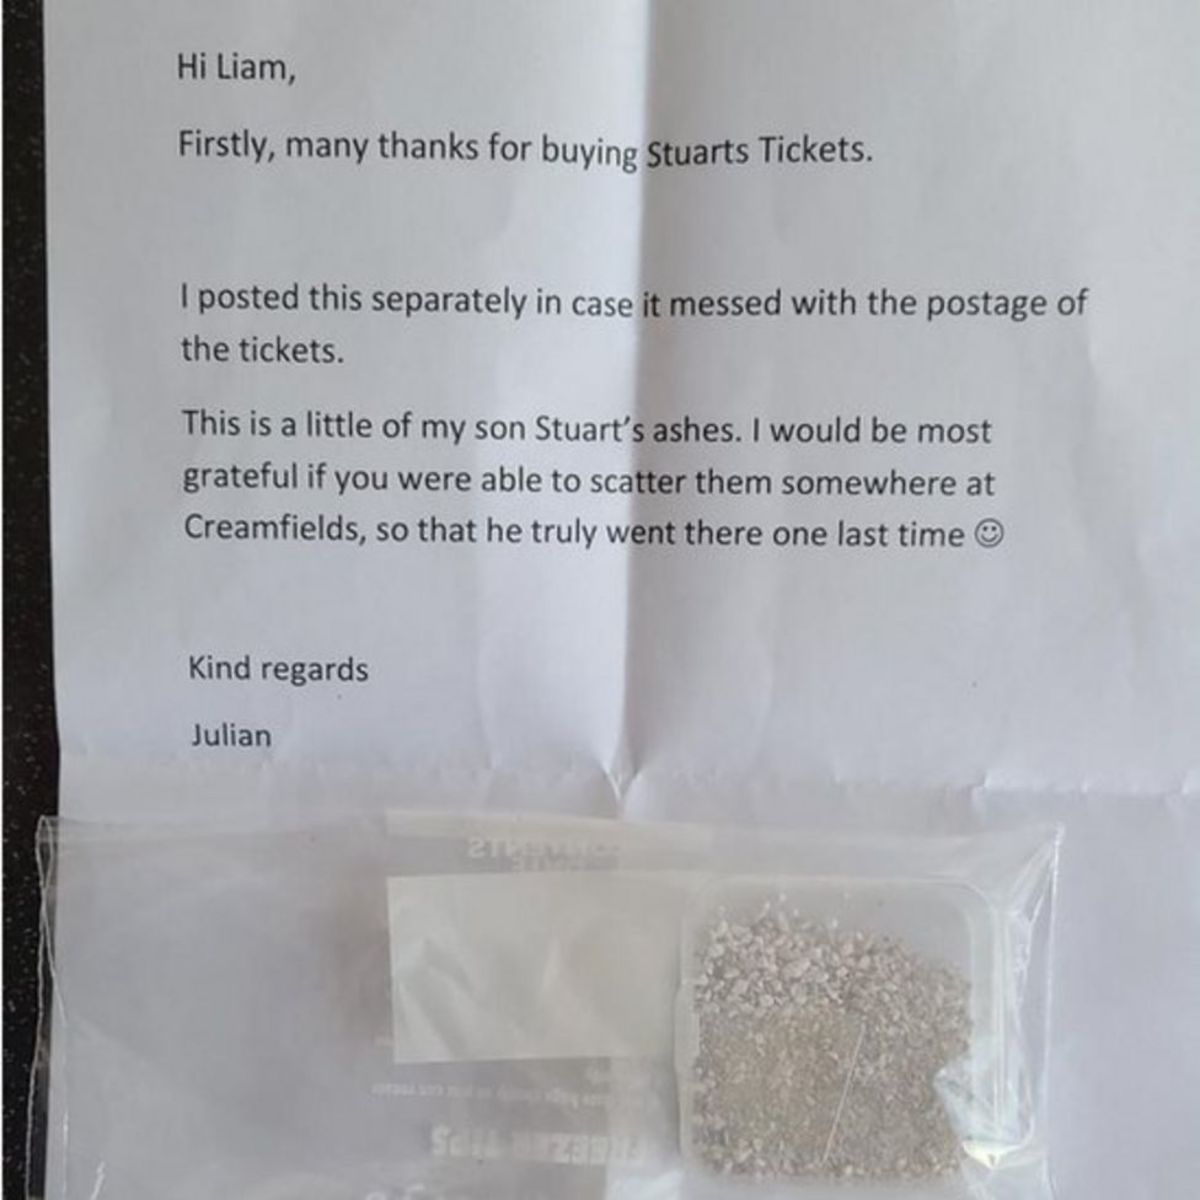 Stuart's father wrote a letter to the Millen's requesting they scatter his ashes at Creamfields. 